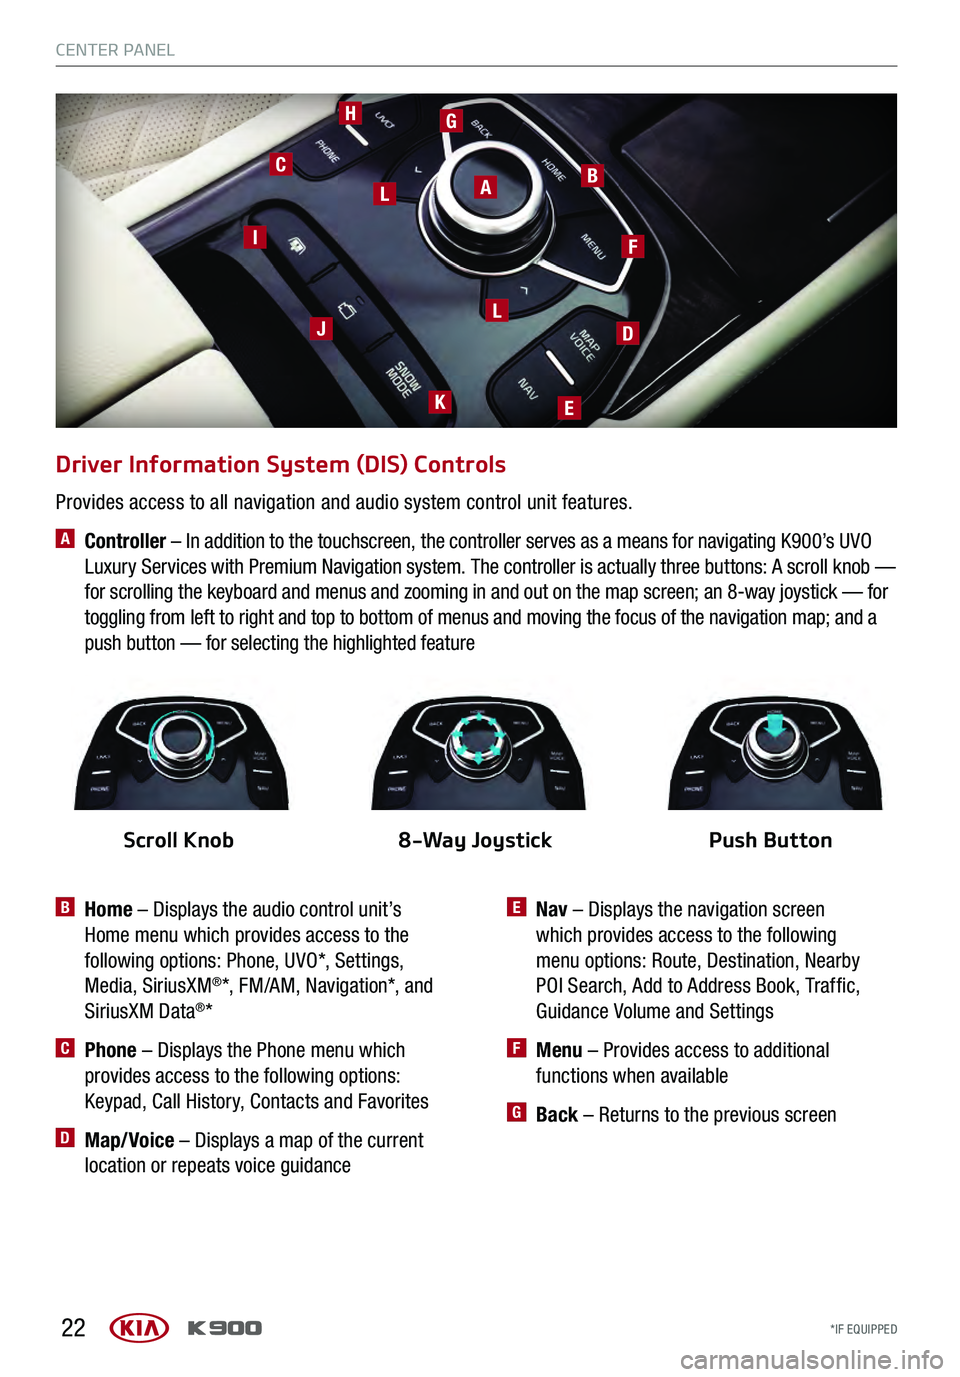 KIA K900 2017  Features and Functions Guide 22
Driver Information System (DIS) Controls
B   Home – Displays the audio control unit’s 
Home menu which provides access to the 
following options: Phone, UVO*, Settings, 
Media, SiriusXM
®*, FM